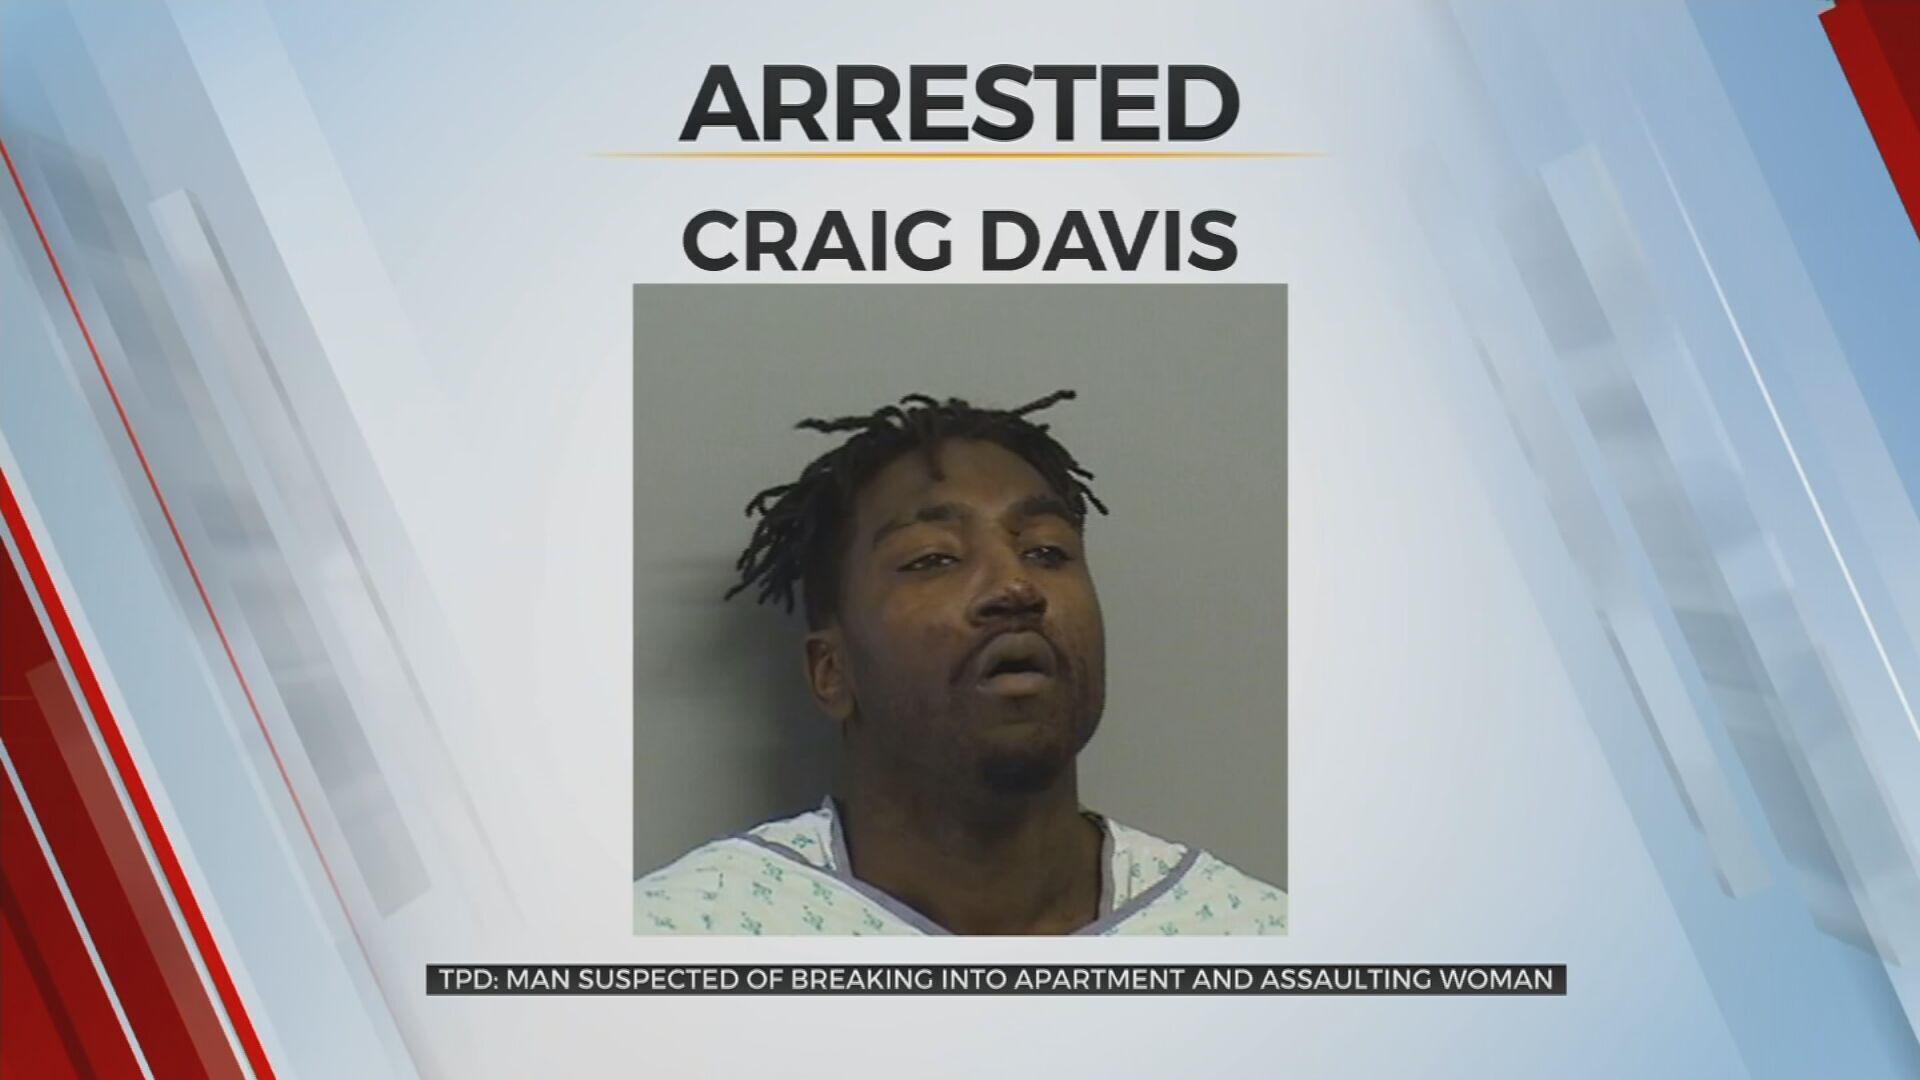 Tulsa Man Arrested, Accused Of Assaulting Woman After Breaking Into Apartment